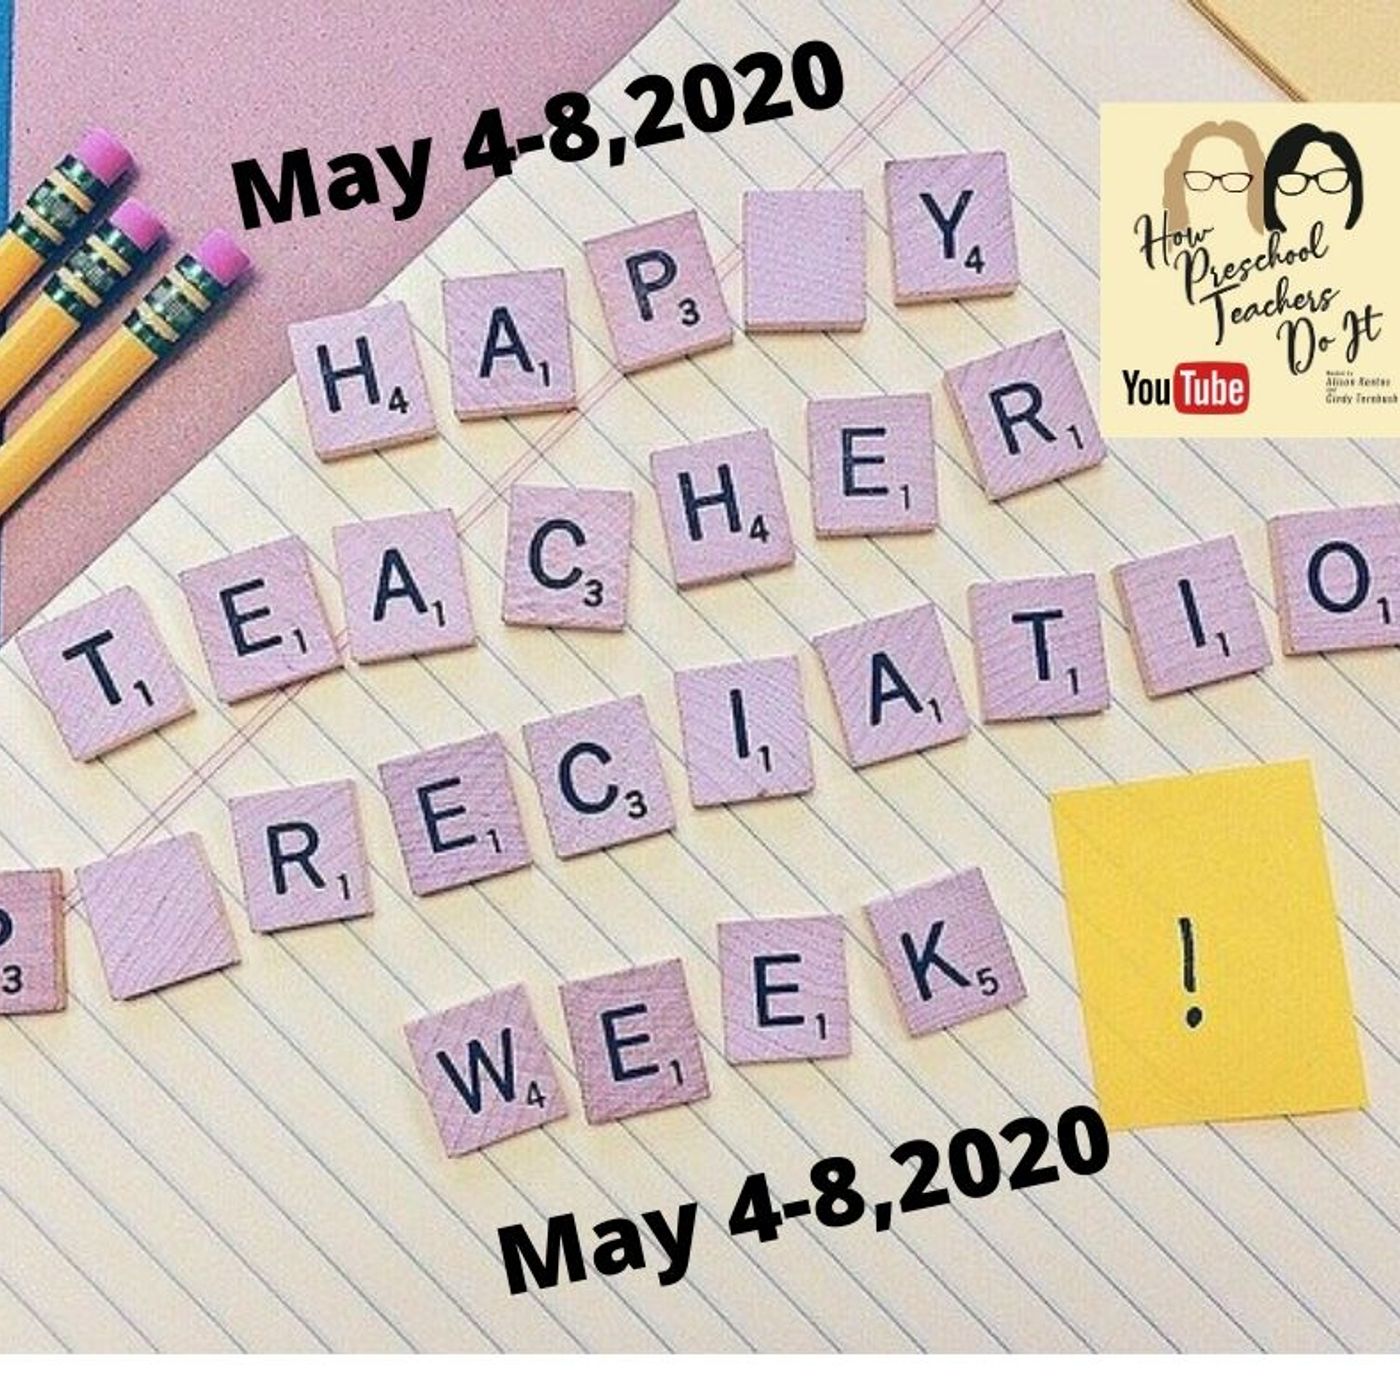 63: Teacher Appreciation Week is Coming - Ideas to Make Teachers Smile During COVID-19